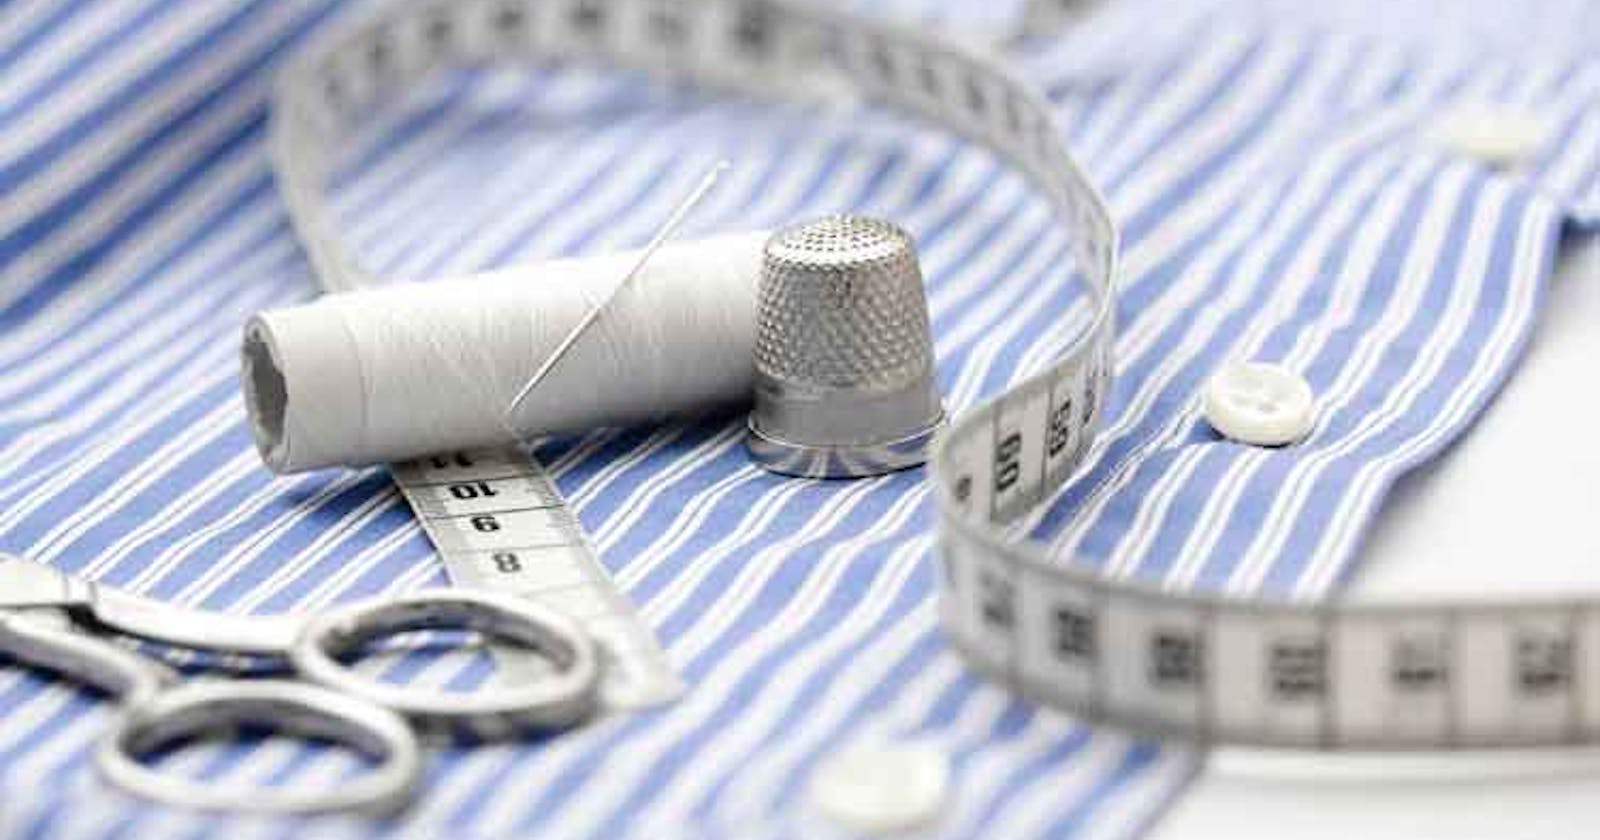 The Easy Way to Find a Best Tailor nearby for, Bespoke Shirt and Suit Alteration in London